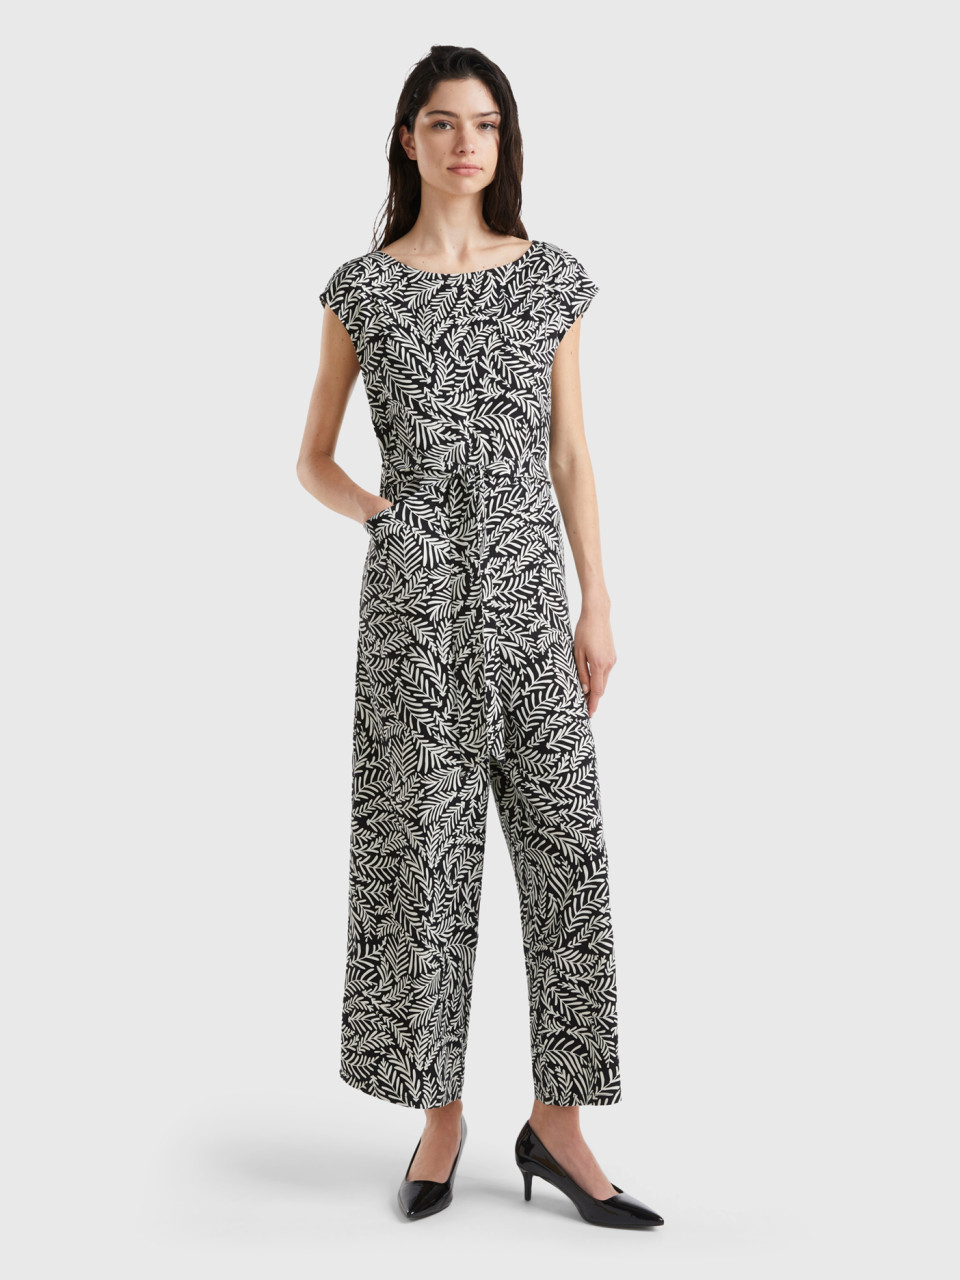 Benetton, Patterned Tracksuit In Sustainable Viscose, Black, Women